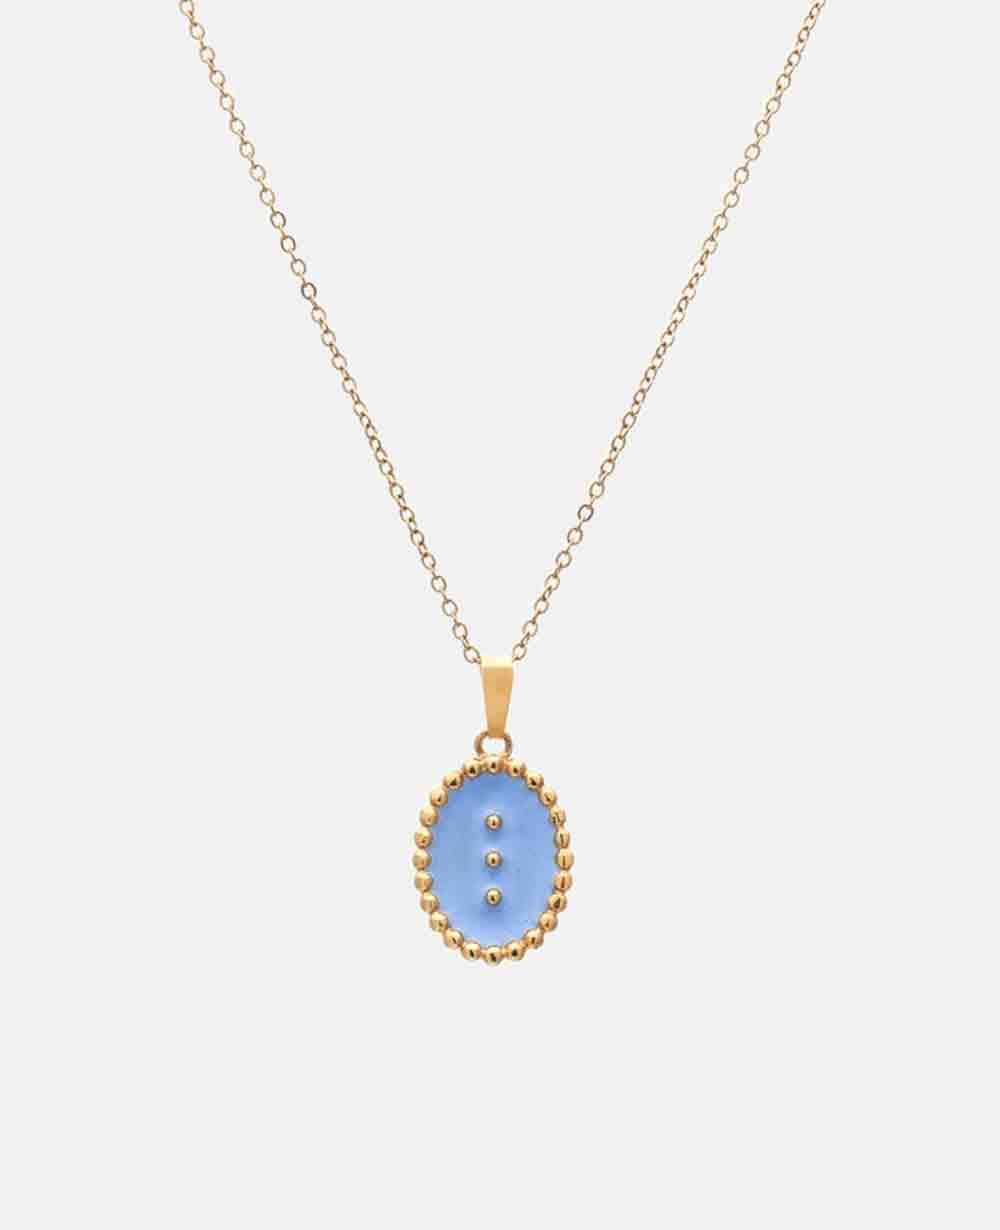 NECKLACE „THREE WISHES“ GOLD/LIGHT BLUE